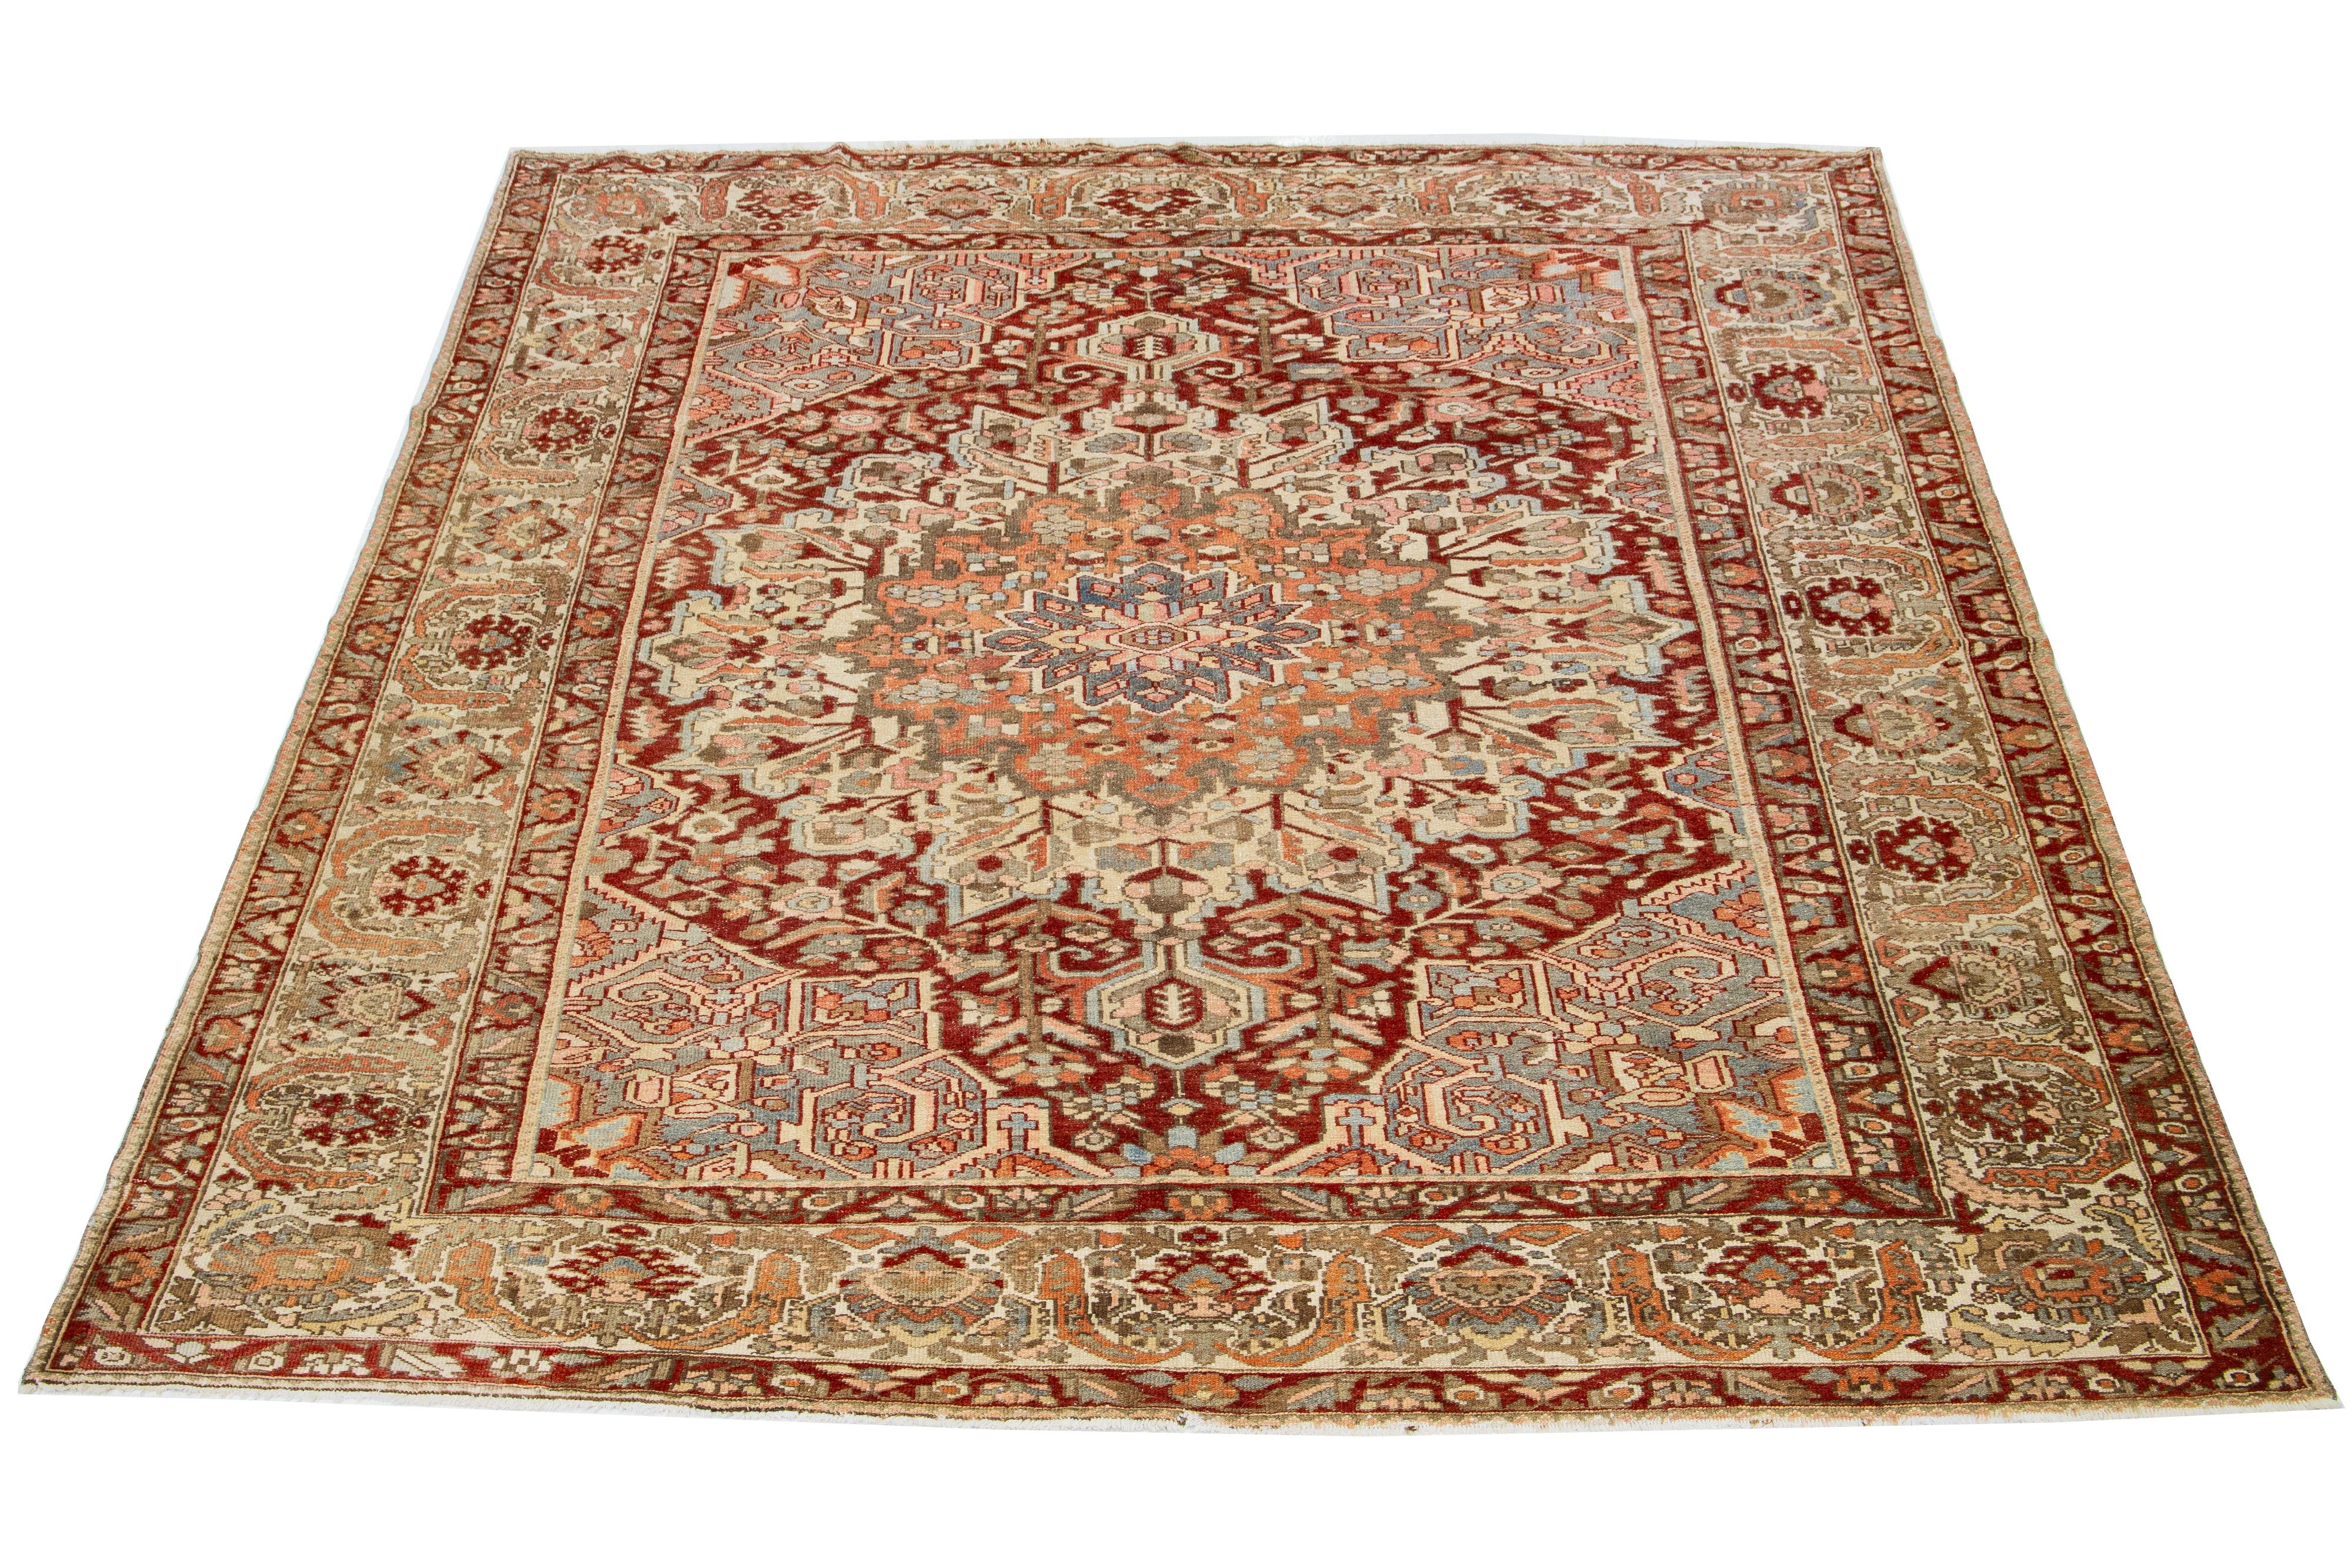 Beautiful room size 1920s Antique Bakhtiari hand-knotted wool rug with a rust color field. This Persian piece has blue, beige, orange, and pink in a classic rosette Motif.

This rug measures 10'1